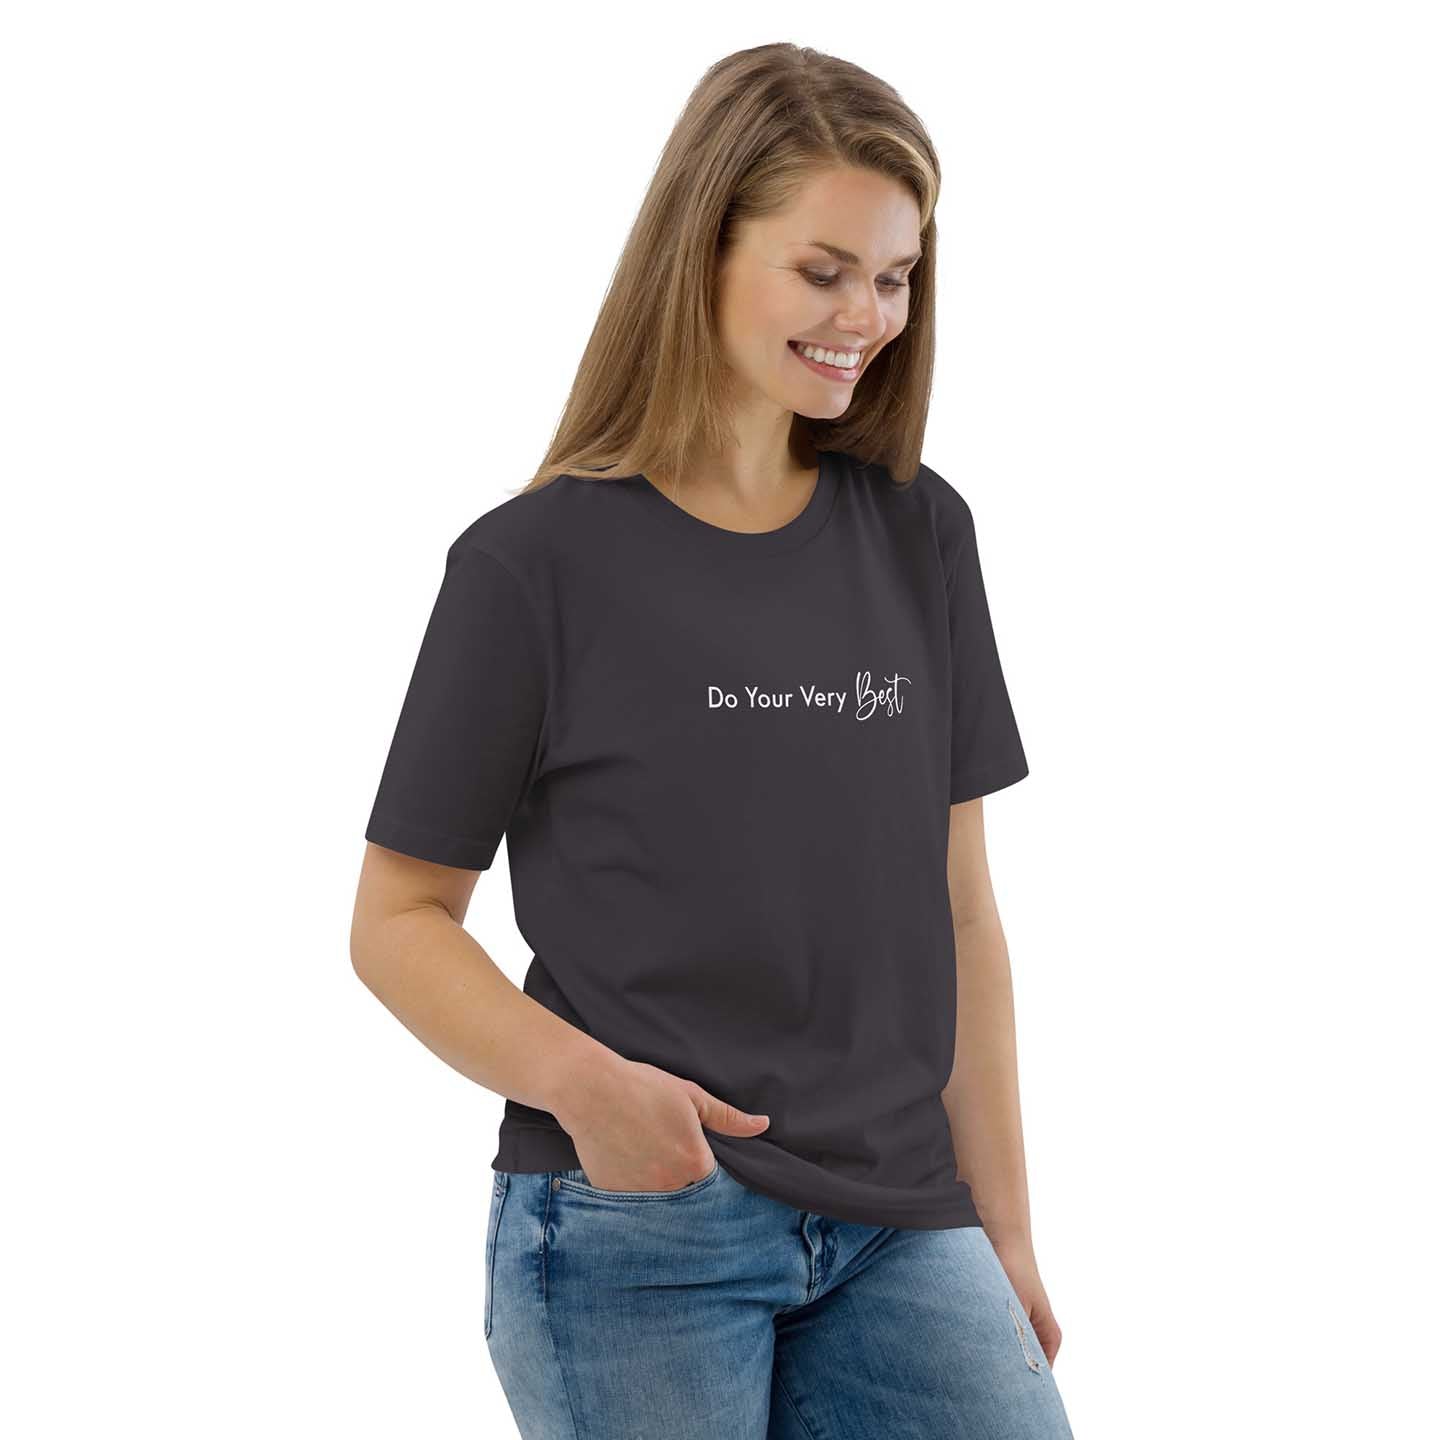 Women dark gray inspirational t-shirt with motivational quote, "Do Your Very Best."